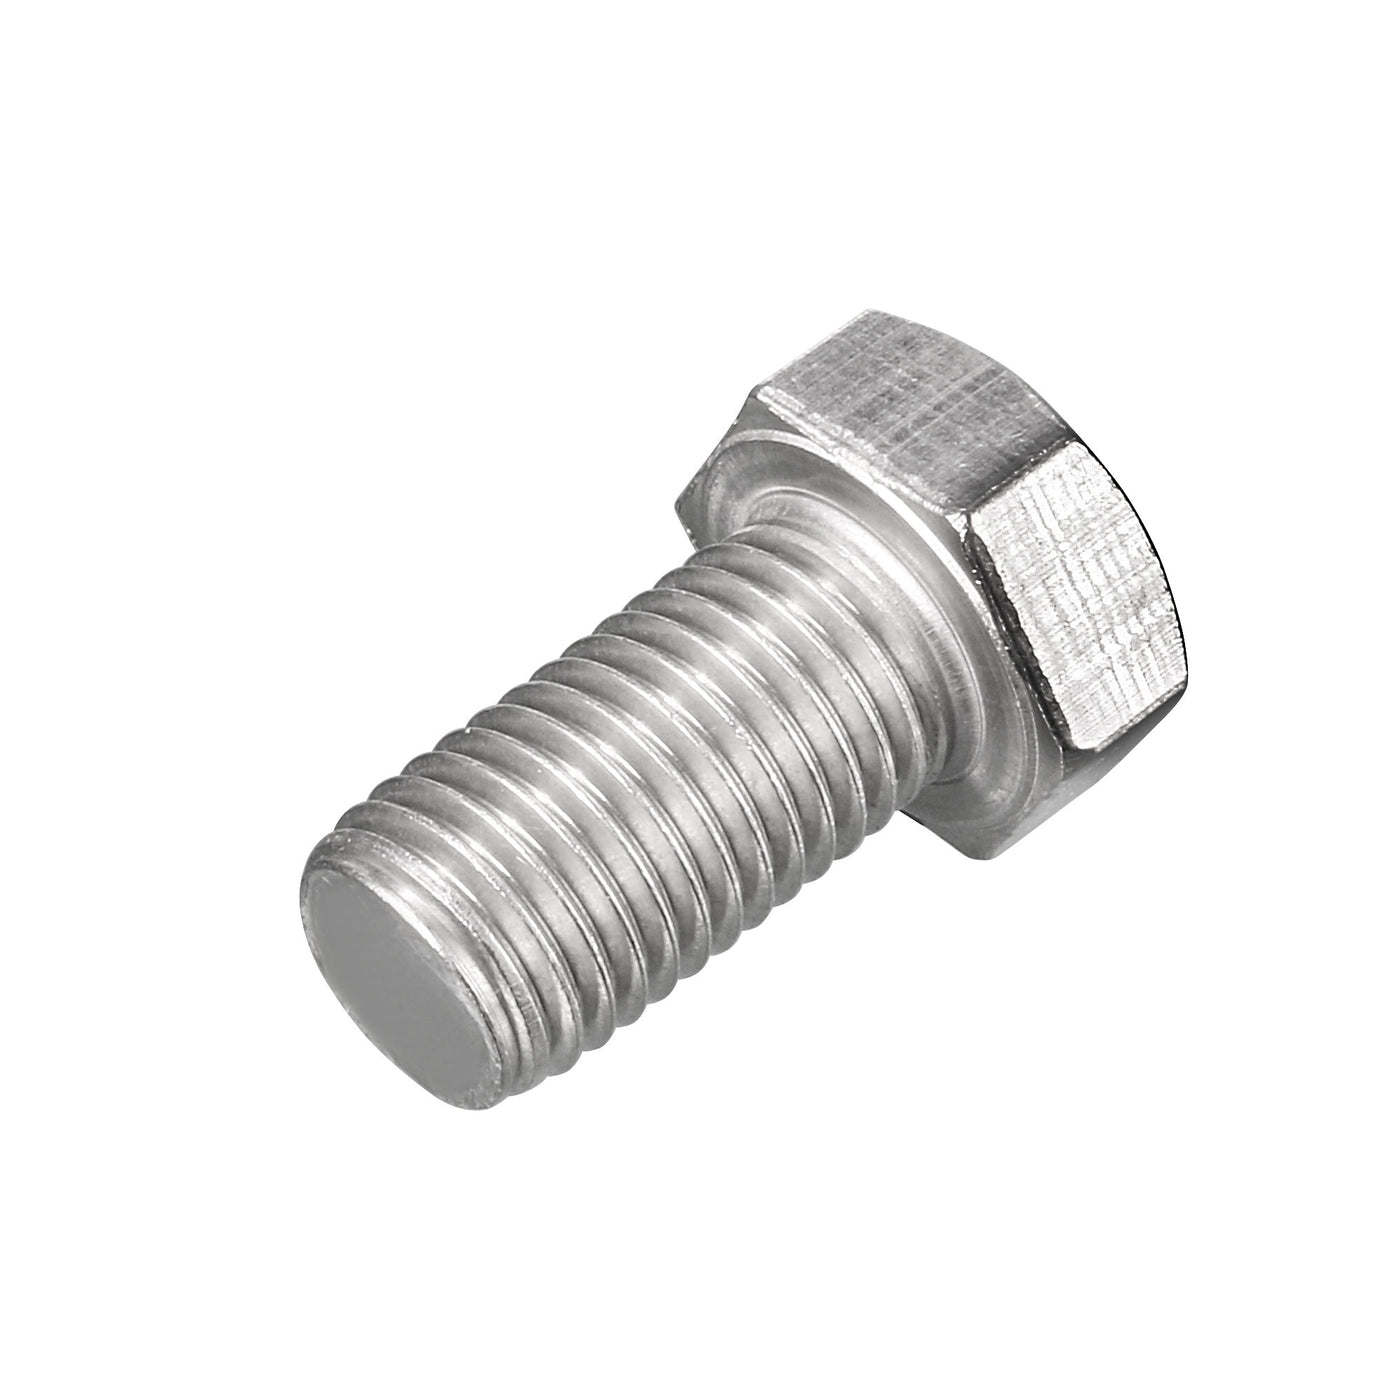 Uxcell Uxcell Hex Screw Bolt, Metric M16x30mm 304 Stainless Steel Fully Threaded Bolts 4pcs